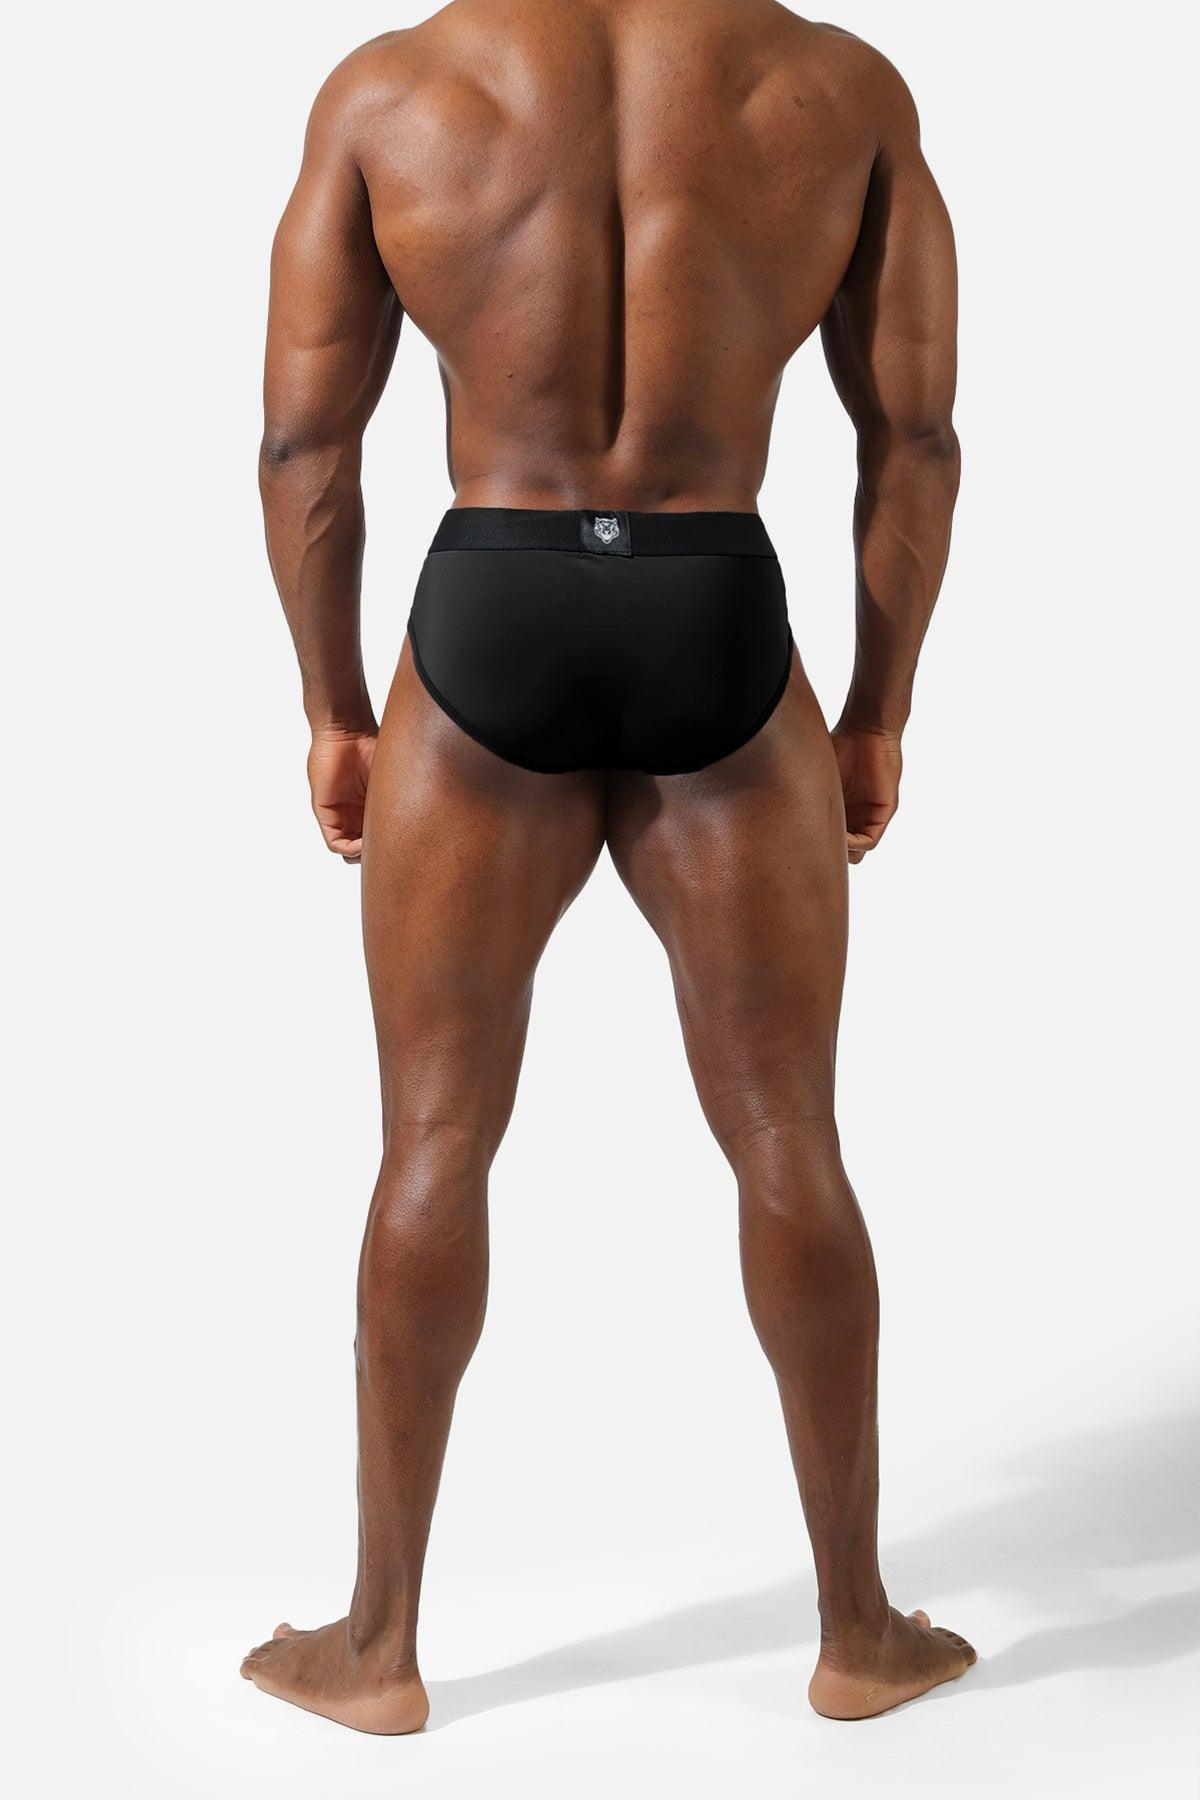 Men's Breathable Black and Grey Brief, 4 pack